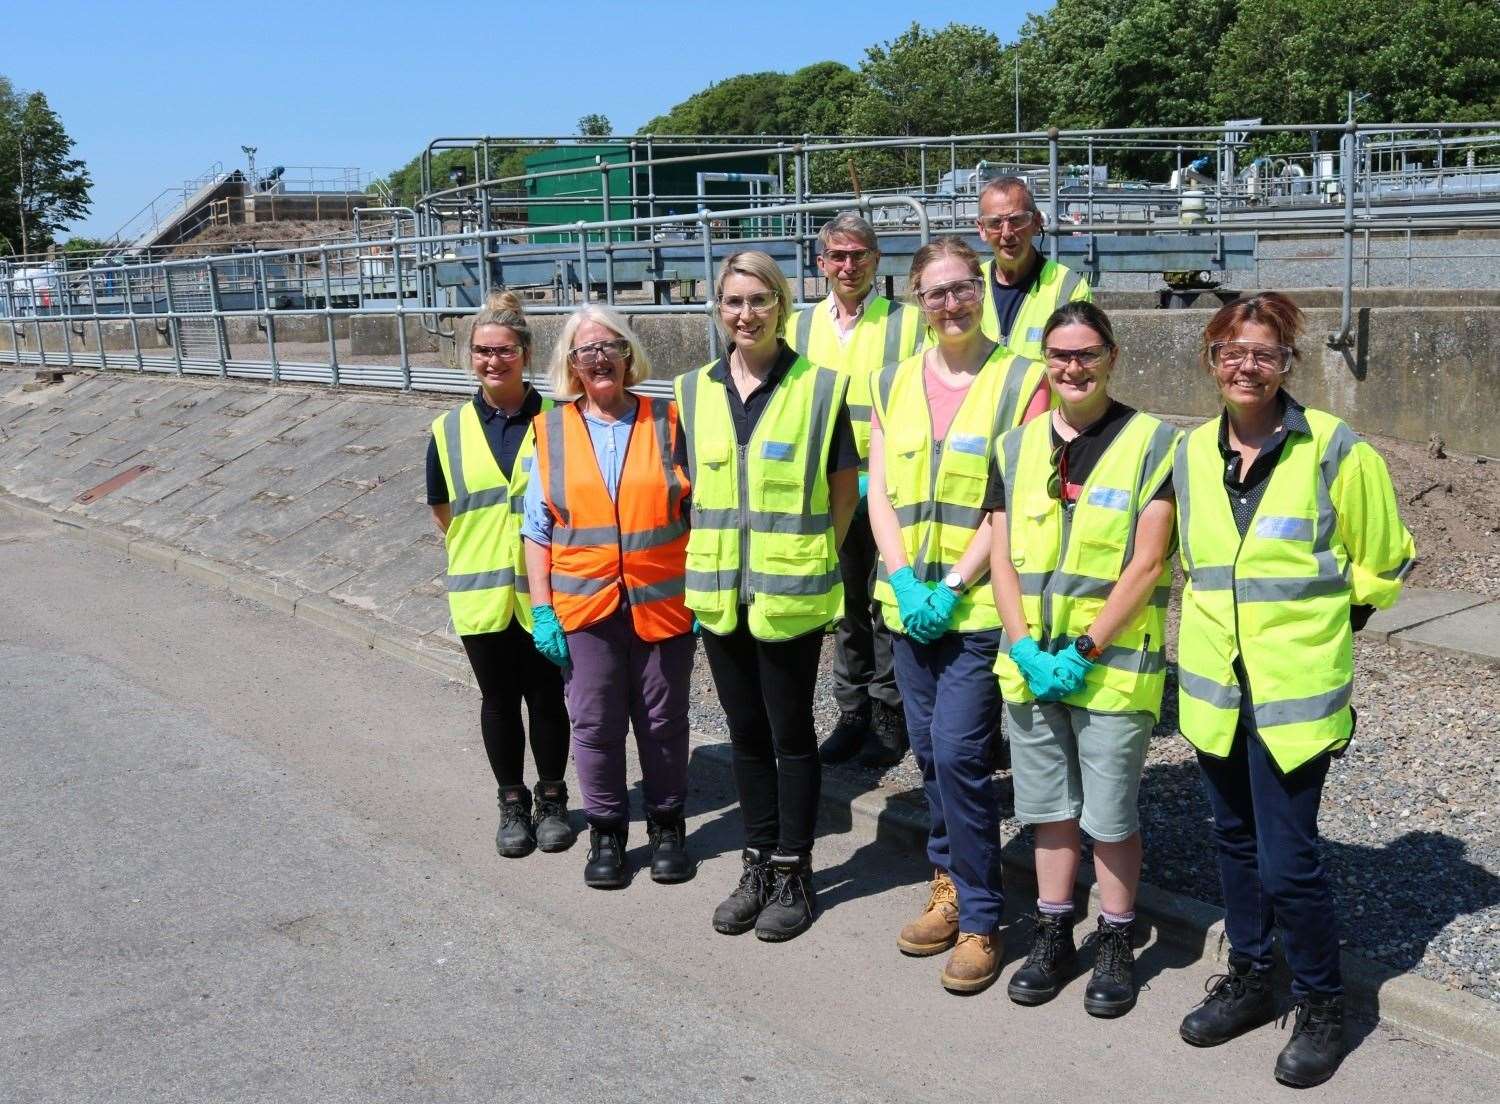 The group after touring the WWTW: (L to R) Leah Alexander (Scottish Water), Cllr Isobel Davidson, Nina Ker (Scottish Water), Mark Andrew (Clerk of the Ythan District Salmon Fishery Board), Lauren Dunkley (East Grampian Coastal Partnership), Andy Will (Scottish Water), Lauren Smith (East Grampian Coastal Partnership) and Cllr Anouk Kloppert (River Ythan Trust)